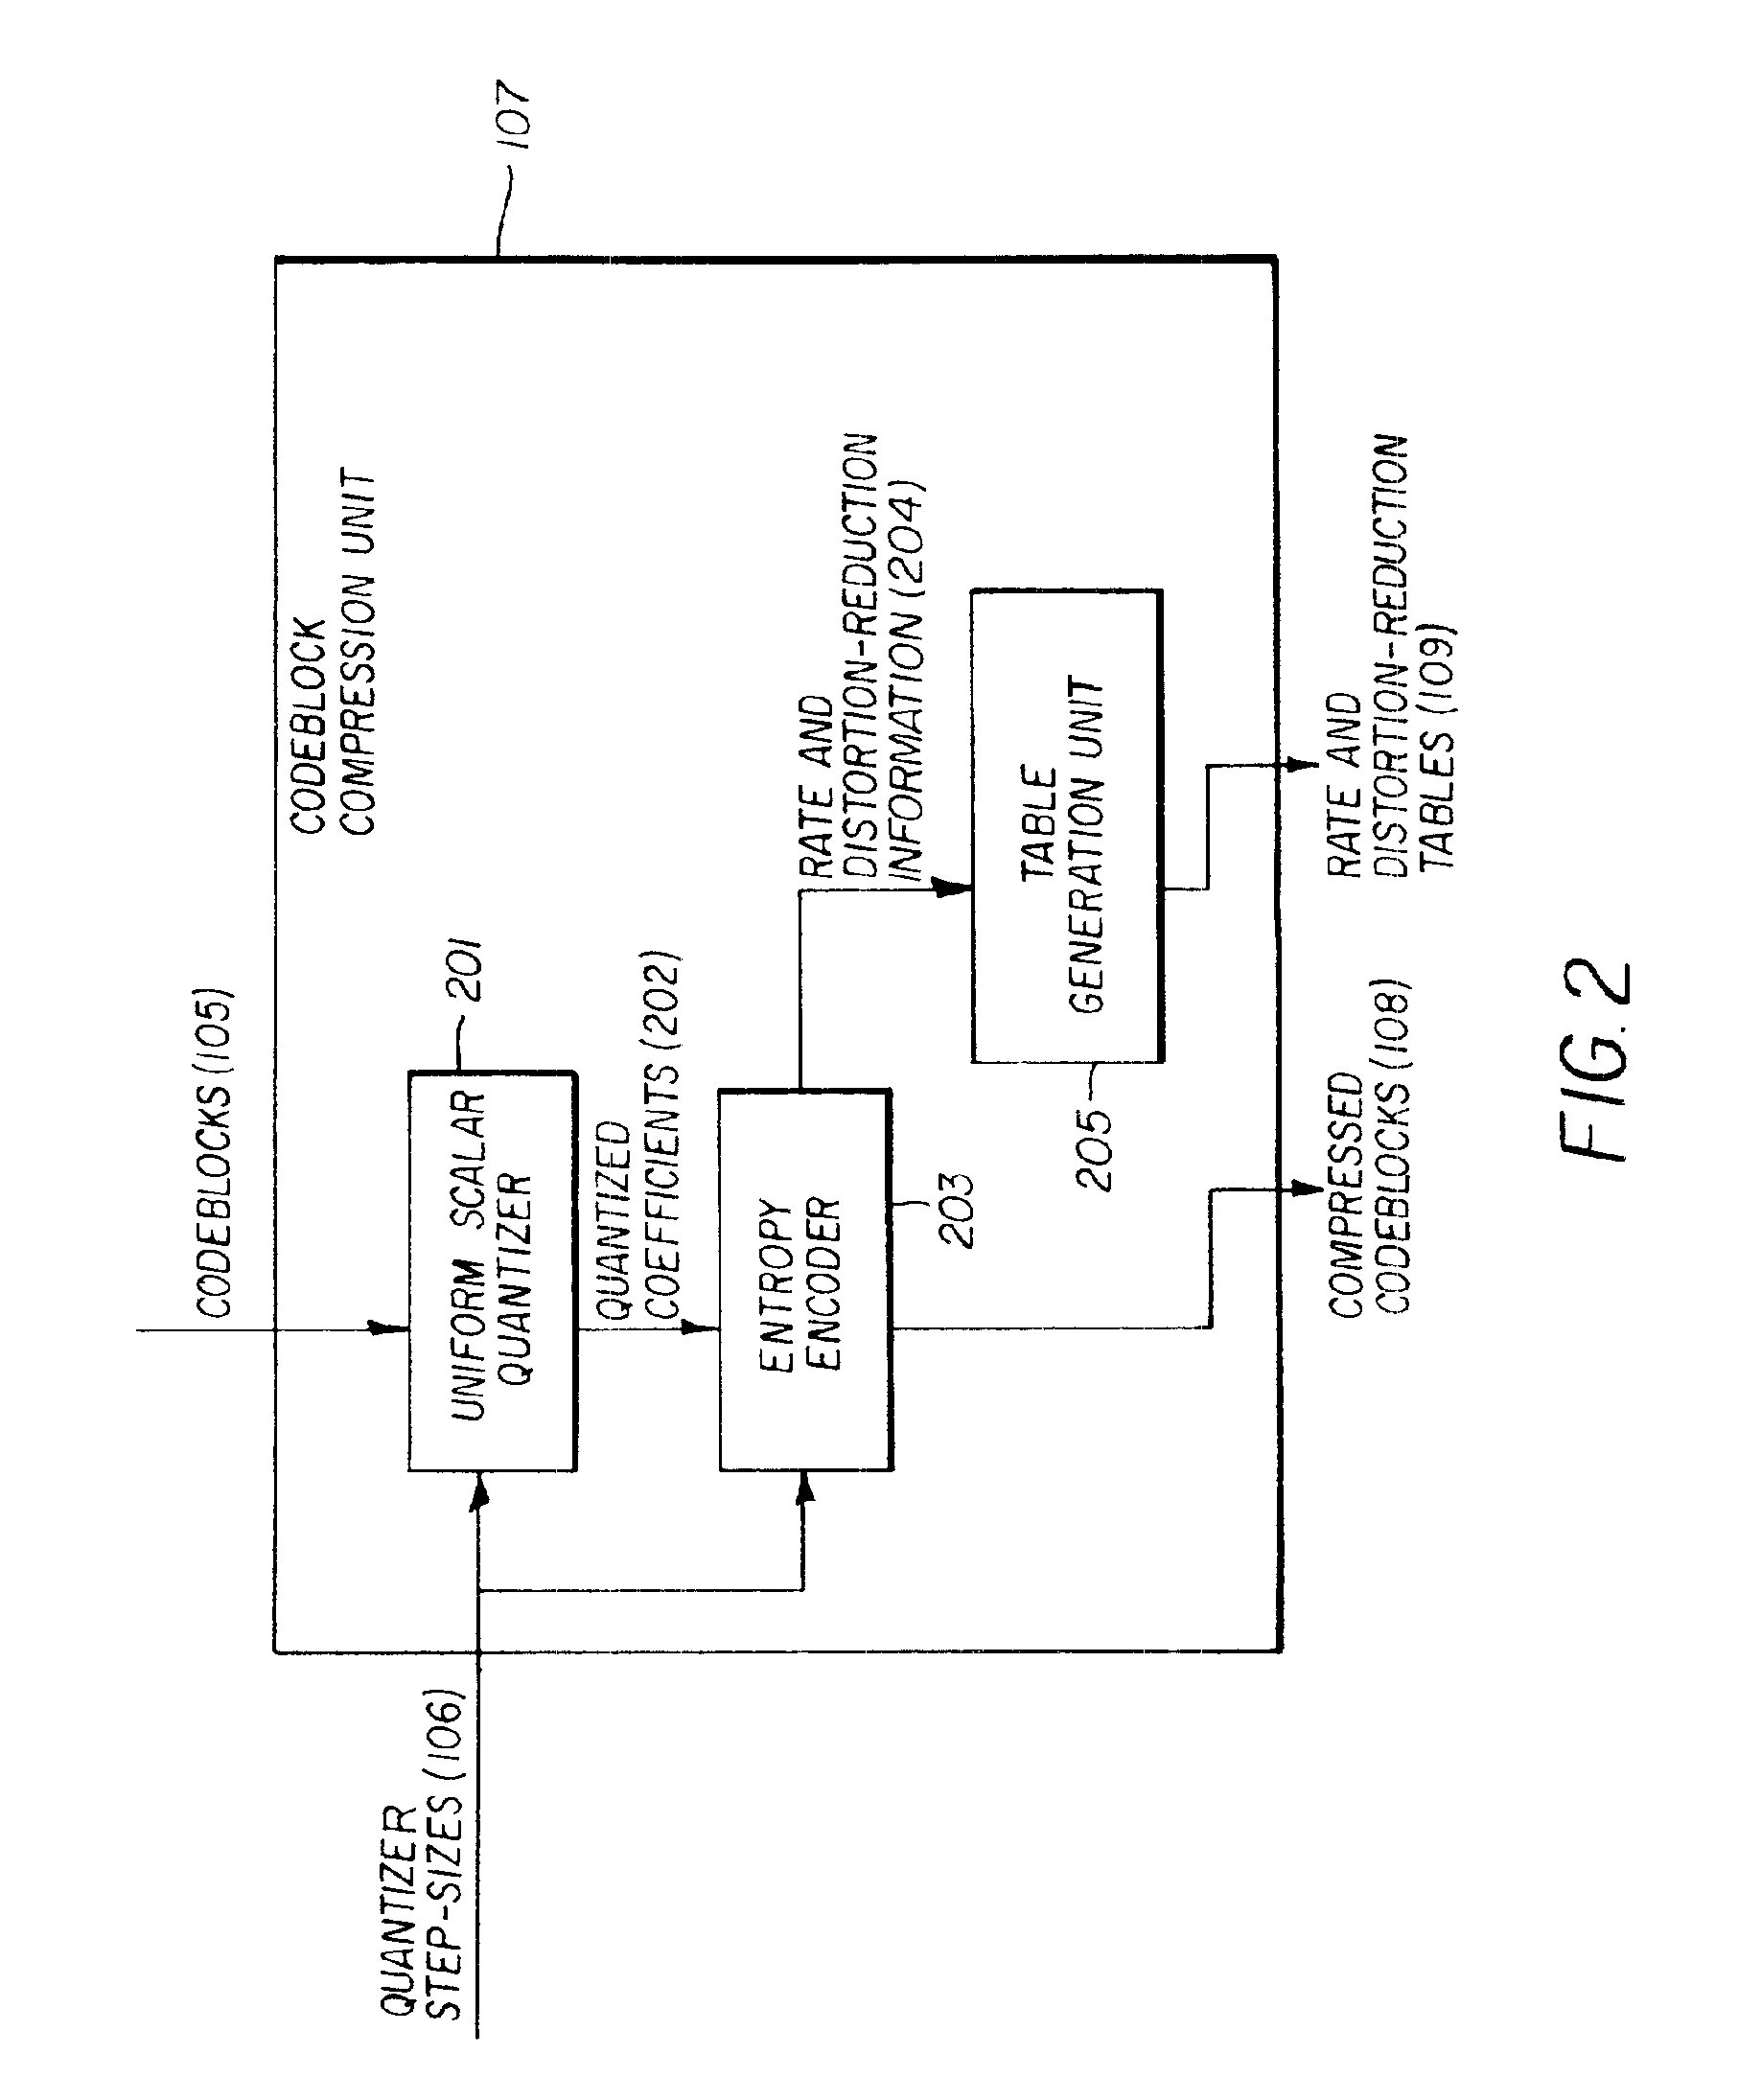 Producing and encoding rate-distortion information allowing optimal transcoding of compressed digital image